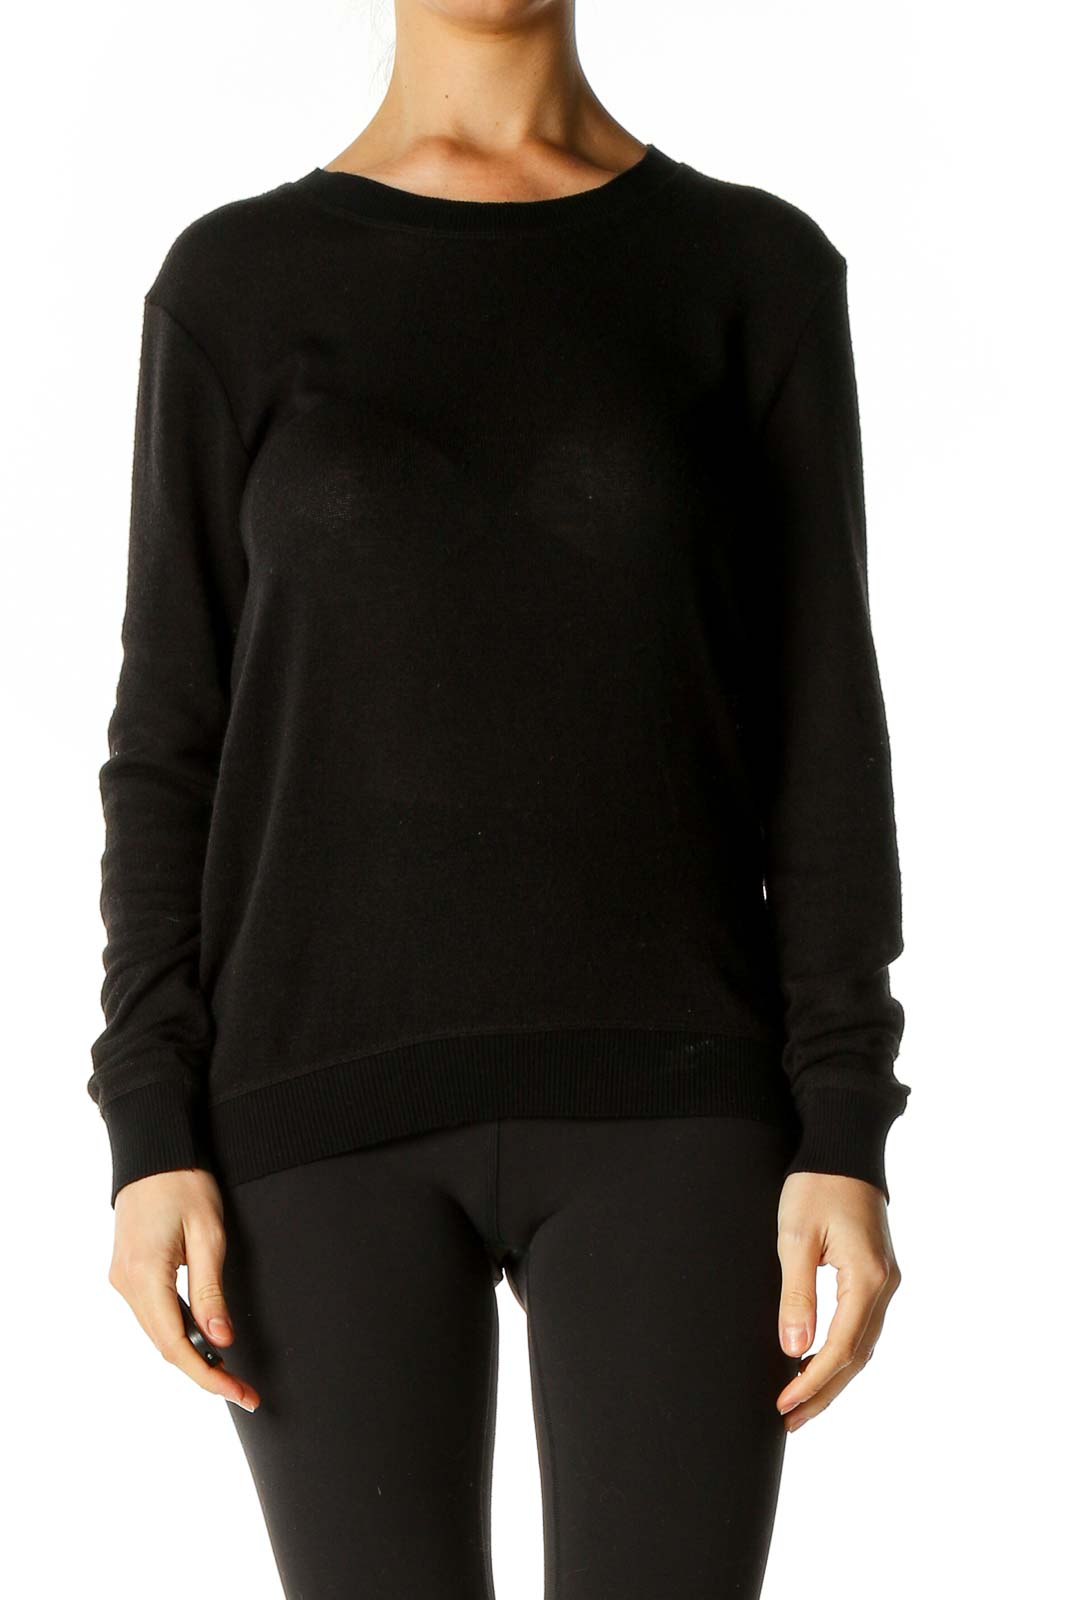 Black All Day Wear Sweater Front